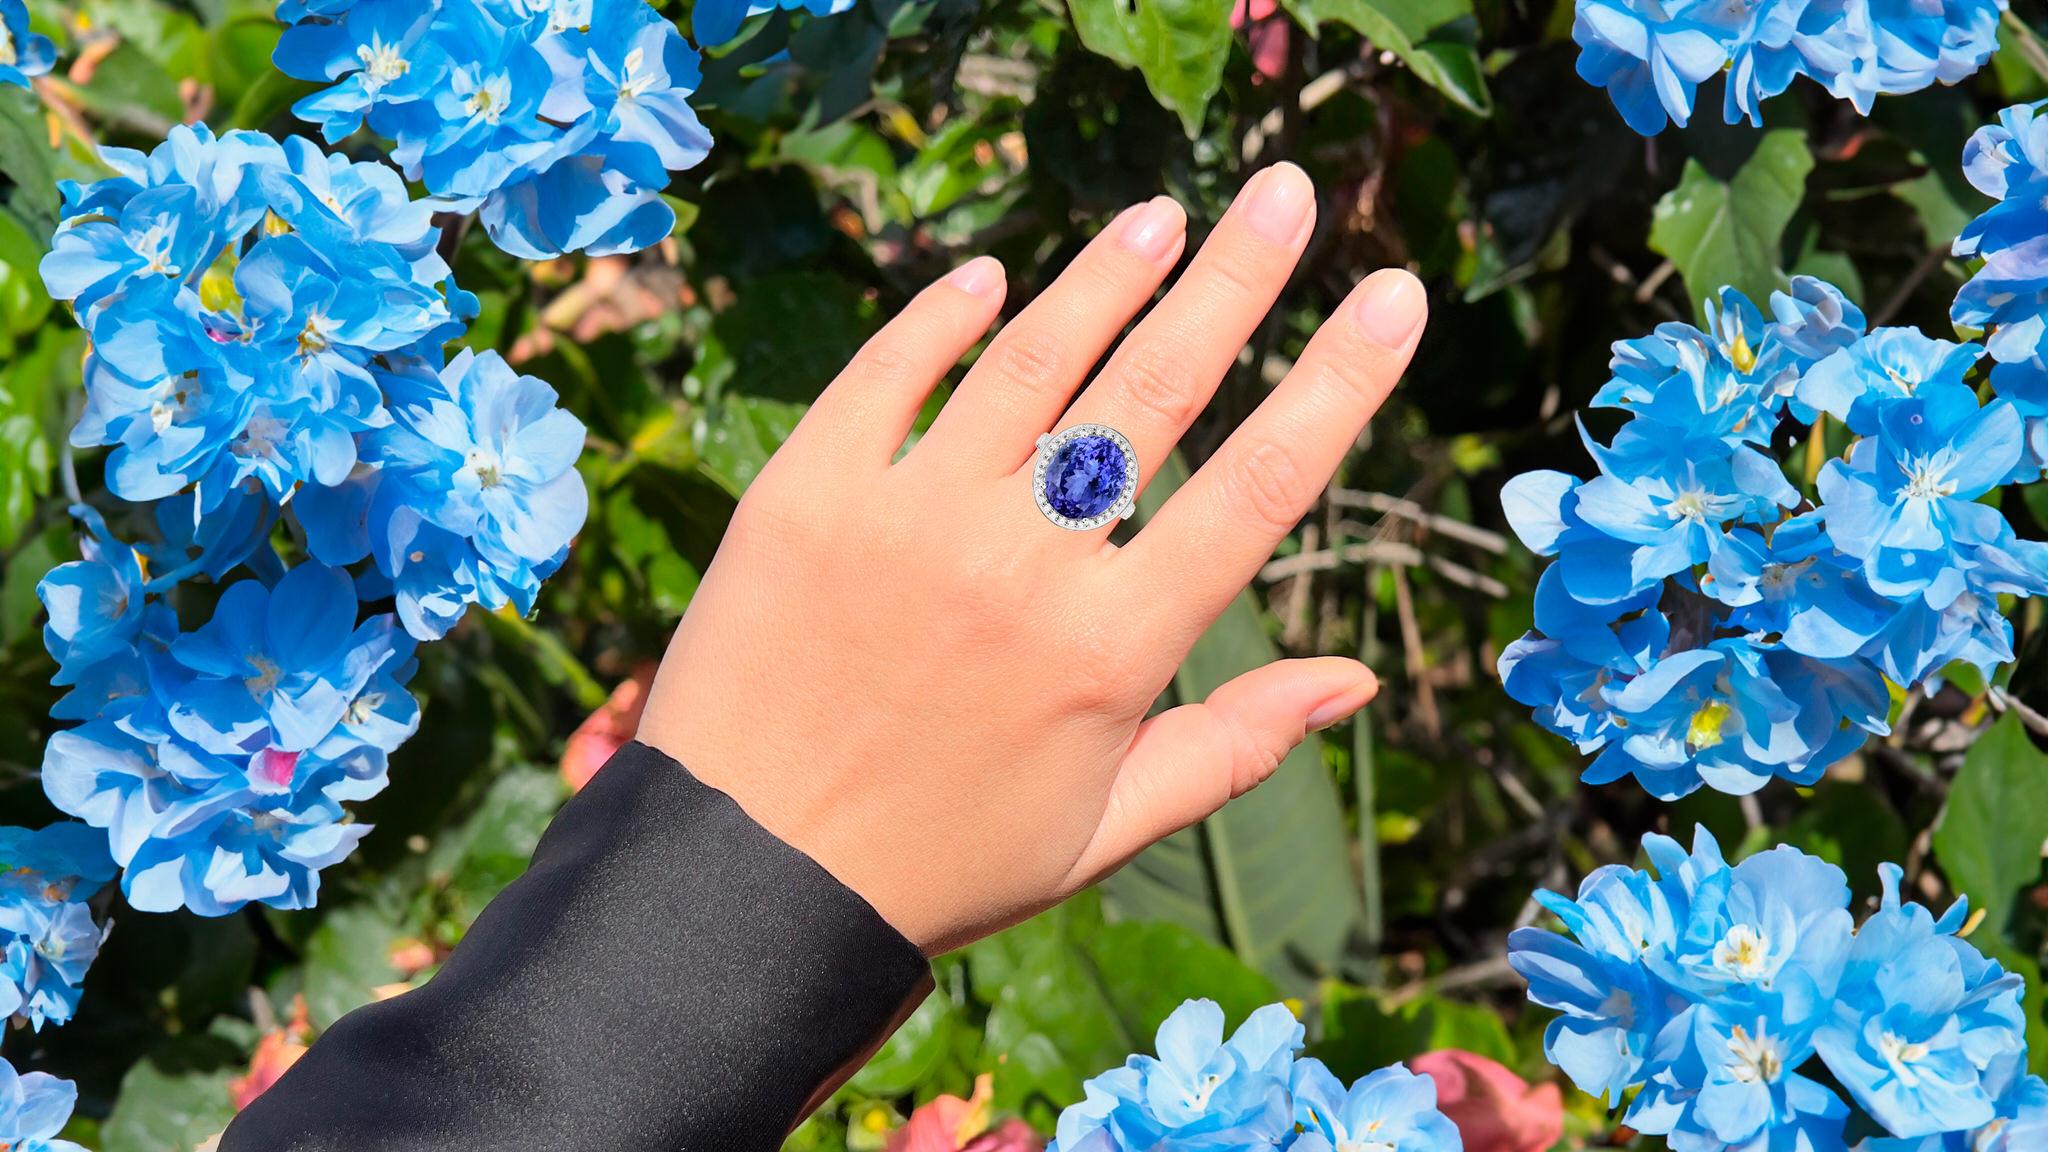 It comes with the Gemological Appraisal by GIA GG/AJP
All Gemstones are Natural
Tanzanite = 17.60 Carats
40 Diamonds = 0.90 Carats
Metal: 18K White Gold
Ring Size: 8* US
*It can be resized complimentary